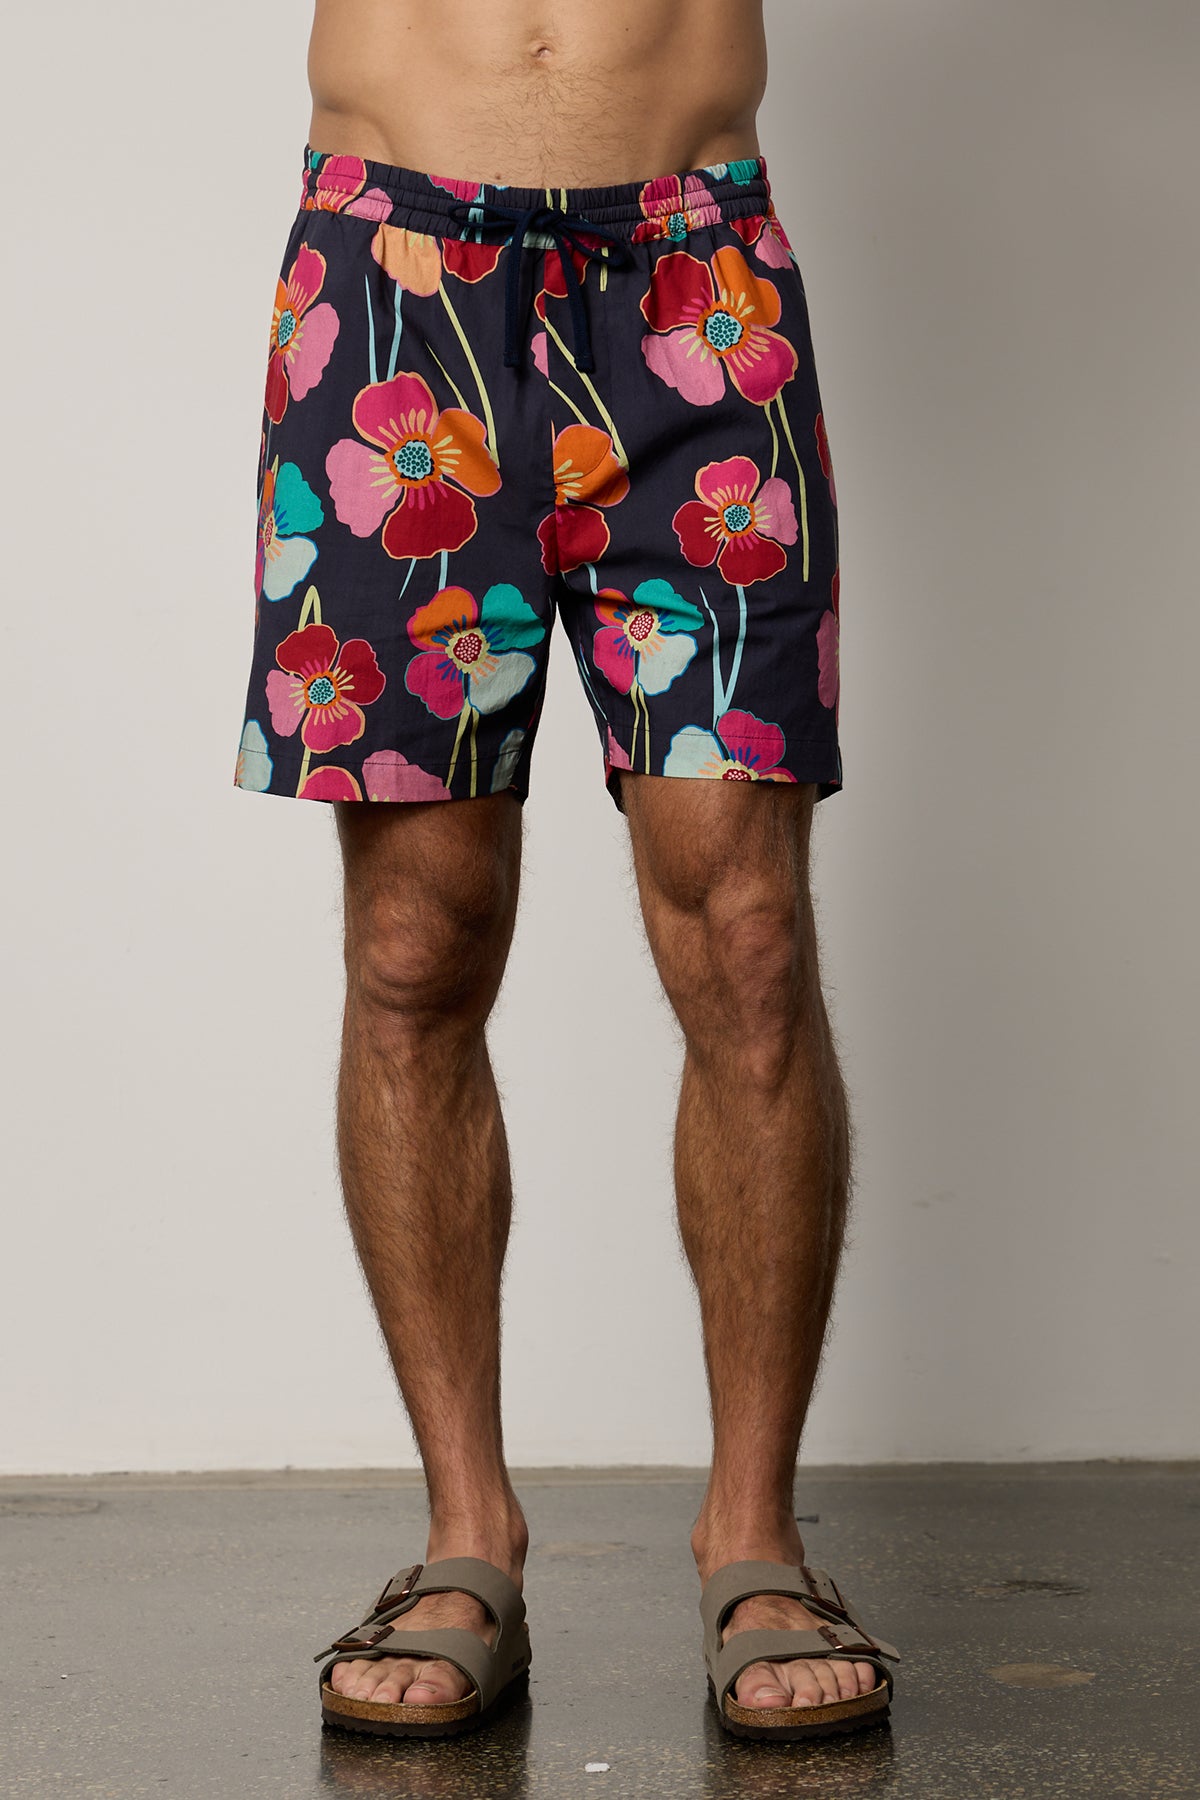   Colt Short front in bahama print with bold, multi colored floral pattern with dark background 